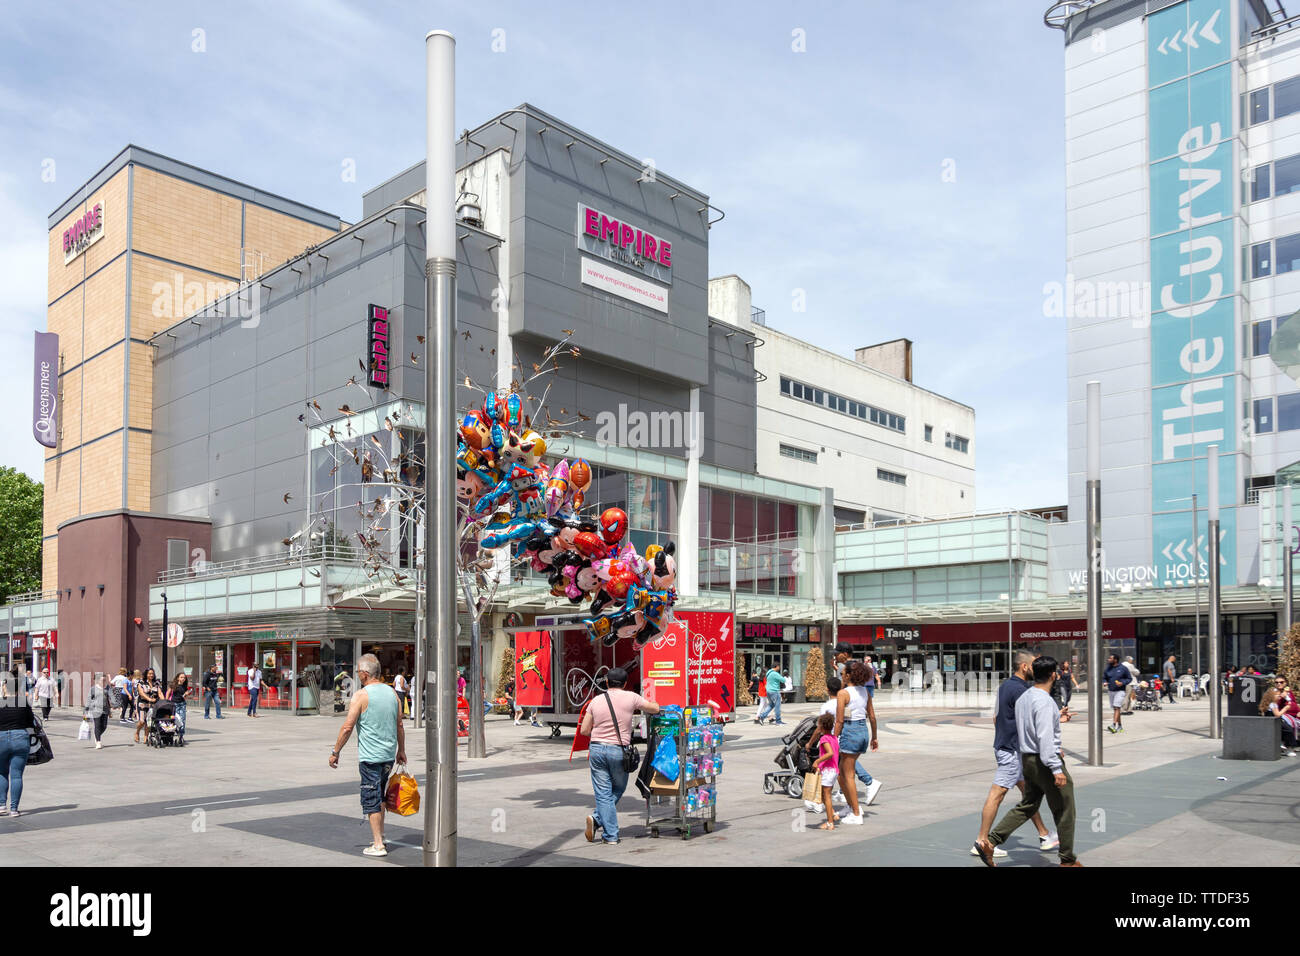 Queensmere Observatory Shopping Centre and Empire Cinemas, High Street, Slough, Berkshire, England, United Kingdom Stock Photo